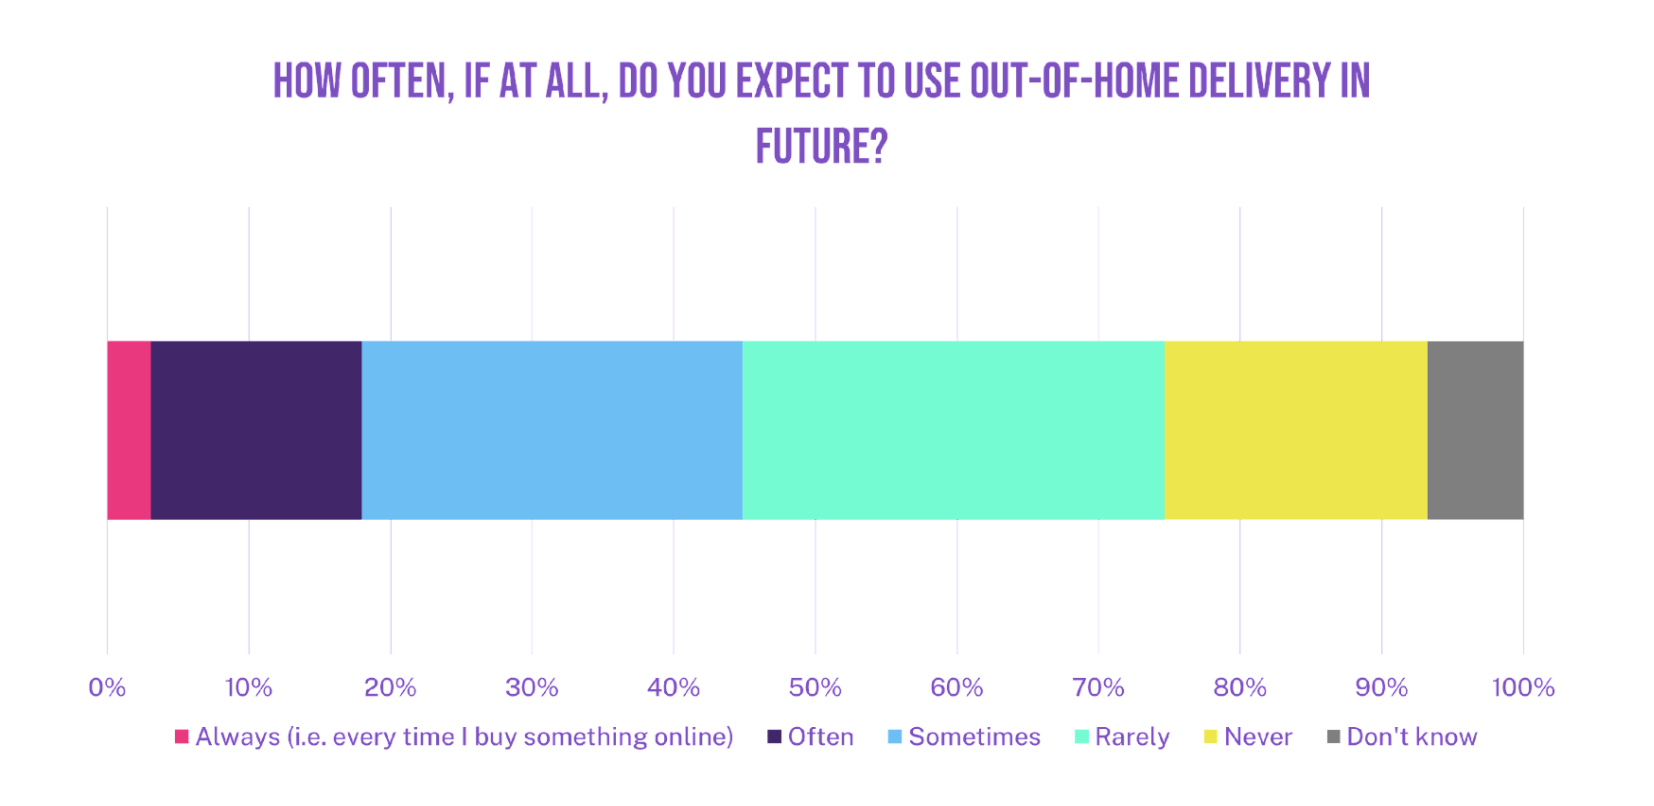 How often at all do you expect to use out-of-home delivery in future?